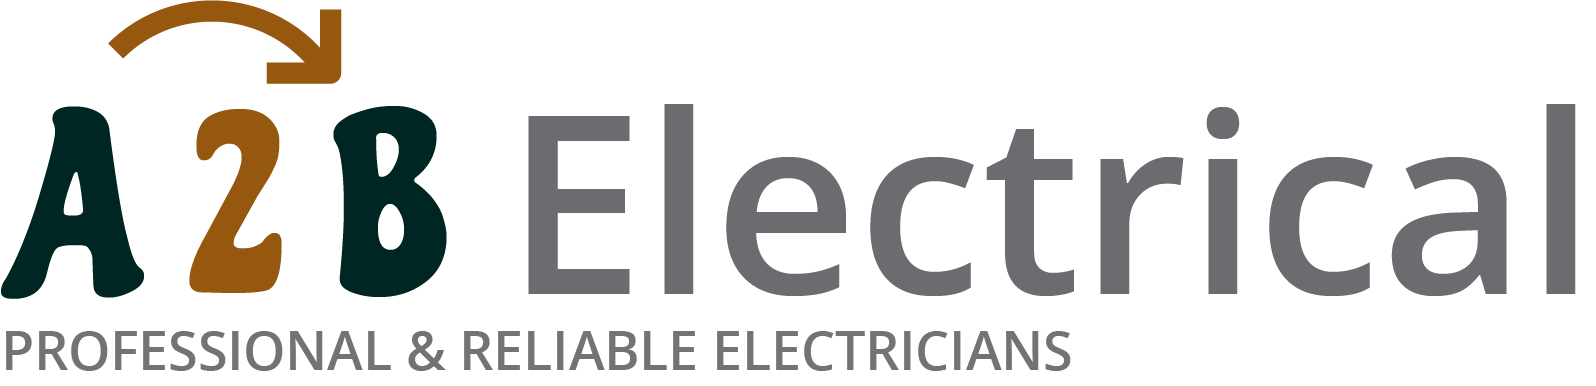 If you have electrical wiring problems in Risley, we can provide an electrician to have a look for you. 